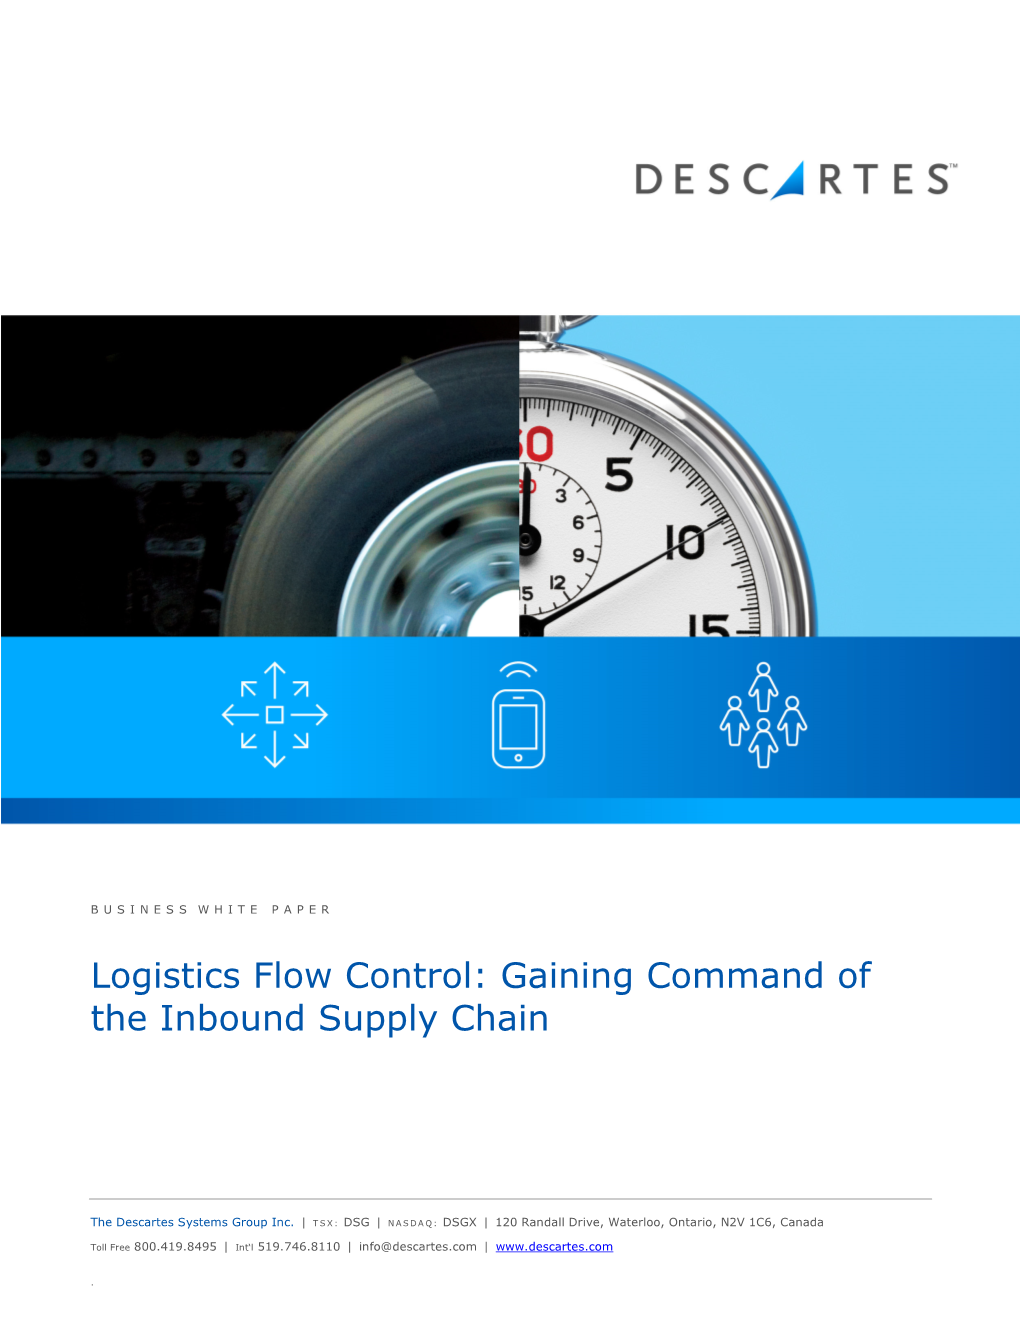 Logistics Flow Control: Gaining Command of the Inbound Supply Chain